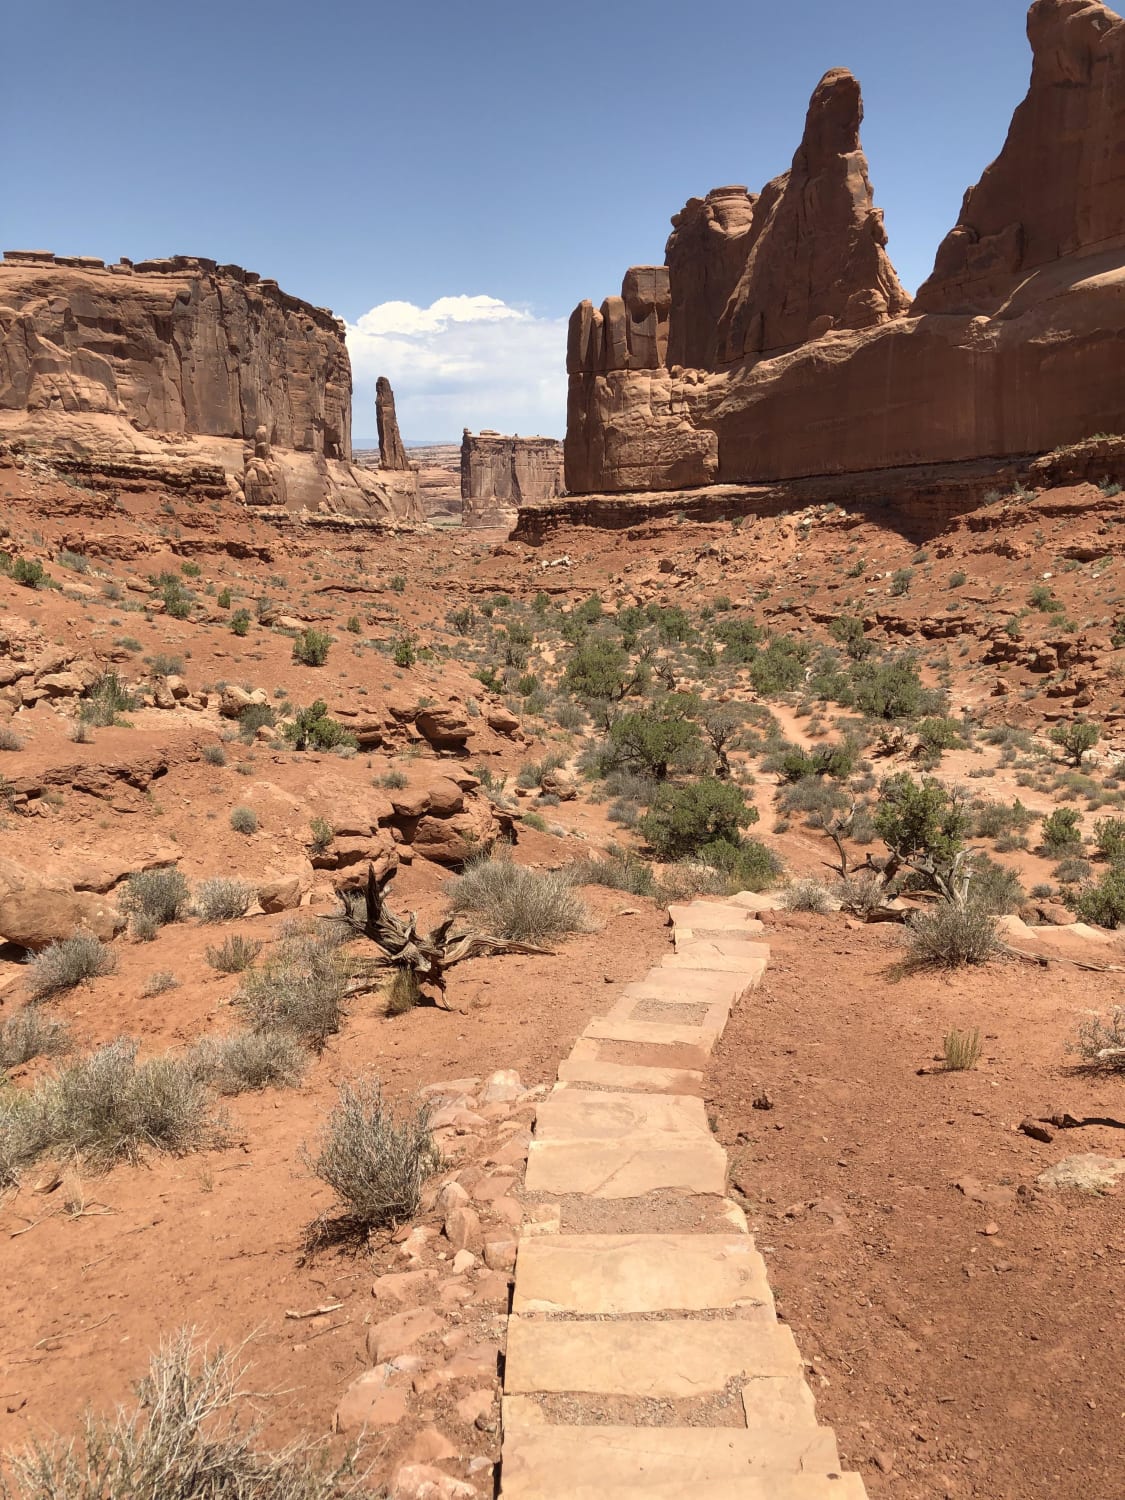 Celebrated 4th of July by hiking Arches National Park today